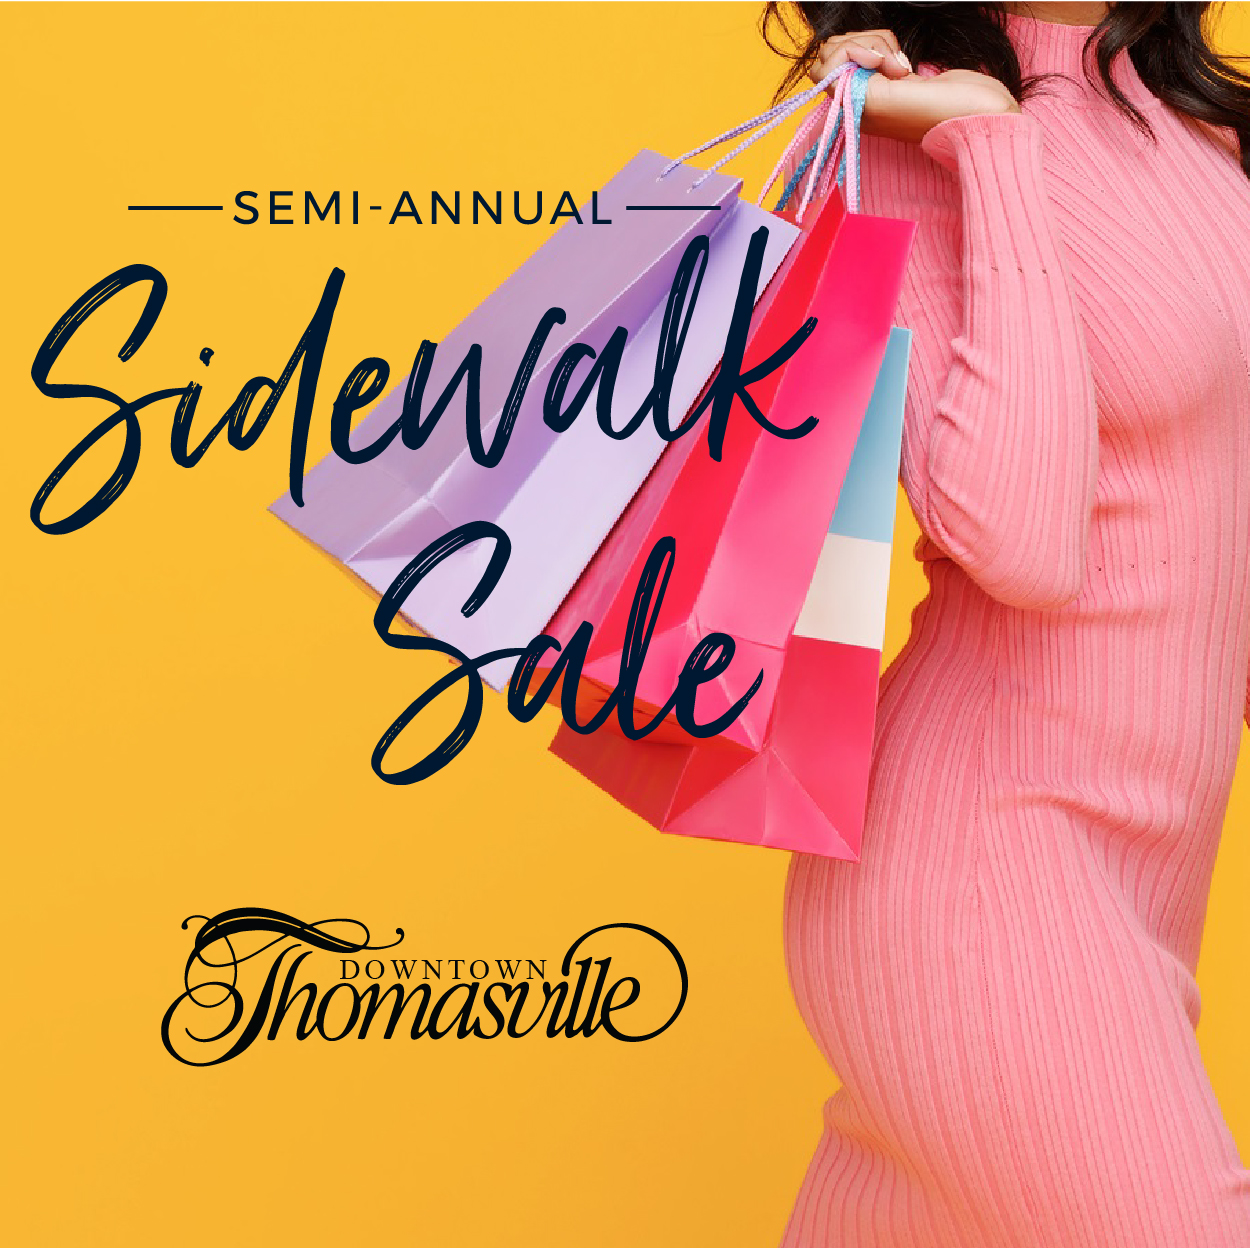 Photo for DOWNTOWN THOMASVILLE SEMI-ANNUAL SIDEWALK SALE TO BE HELD SATURDAY, FEBRUARY 20TH